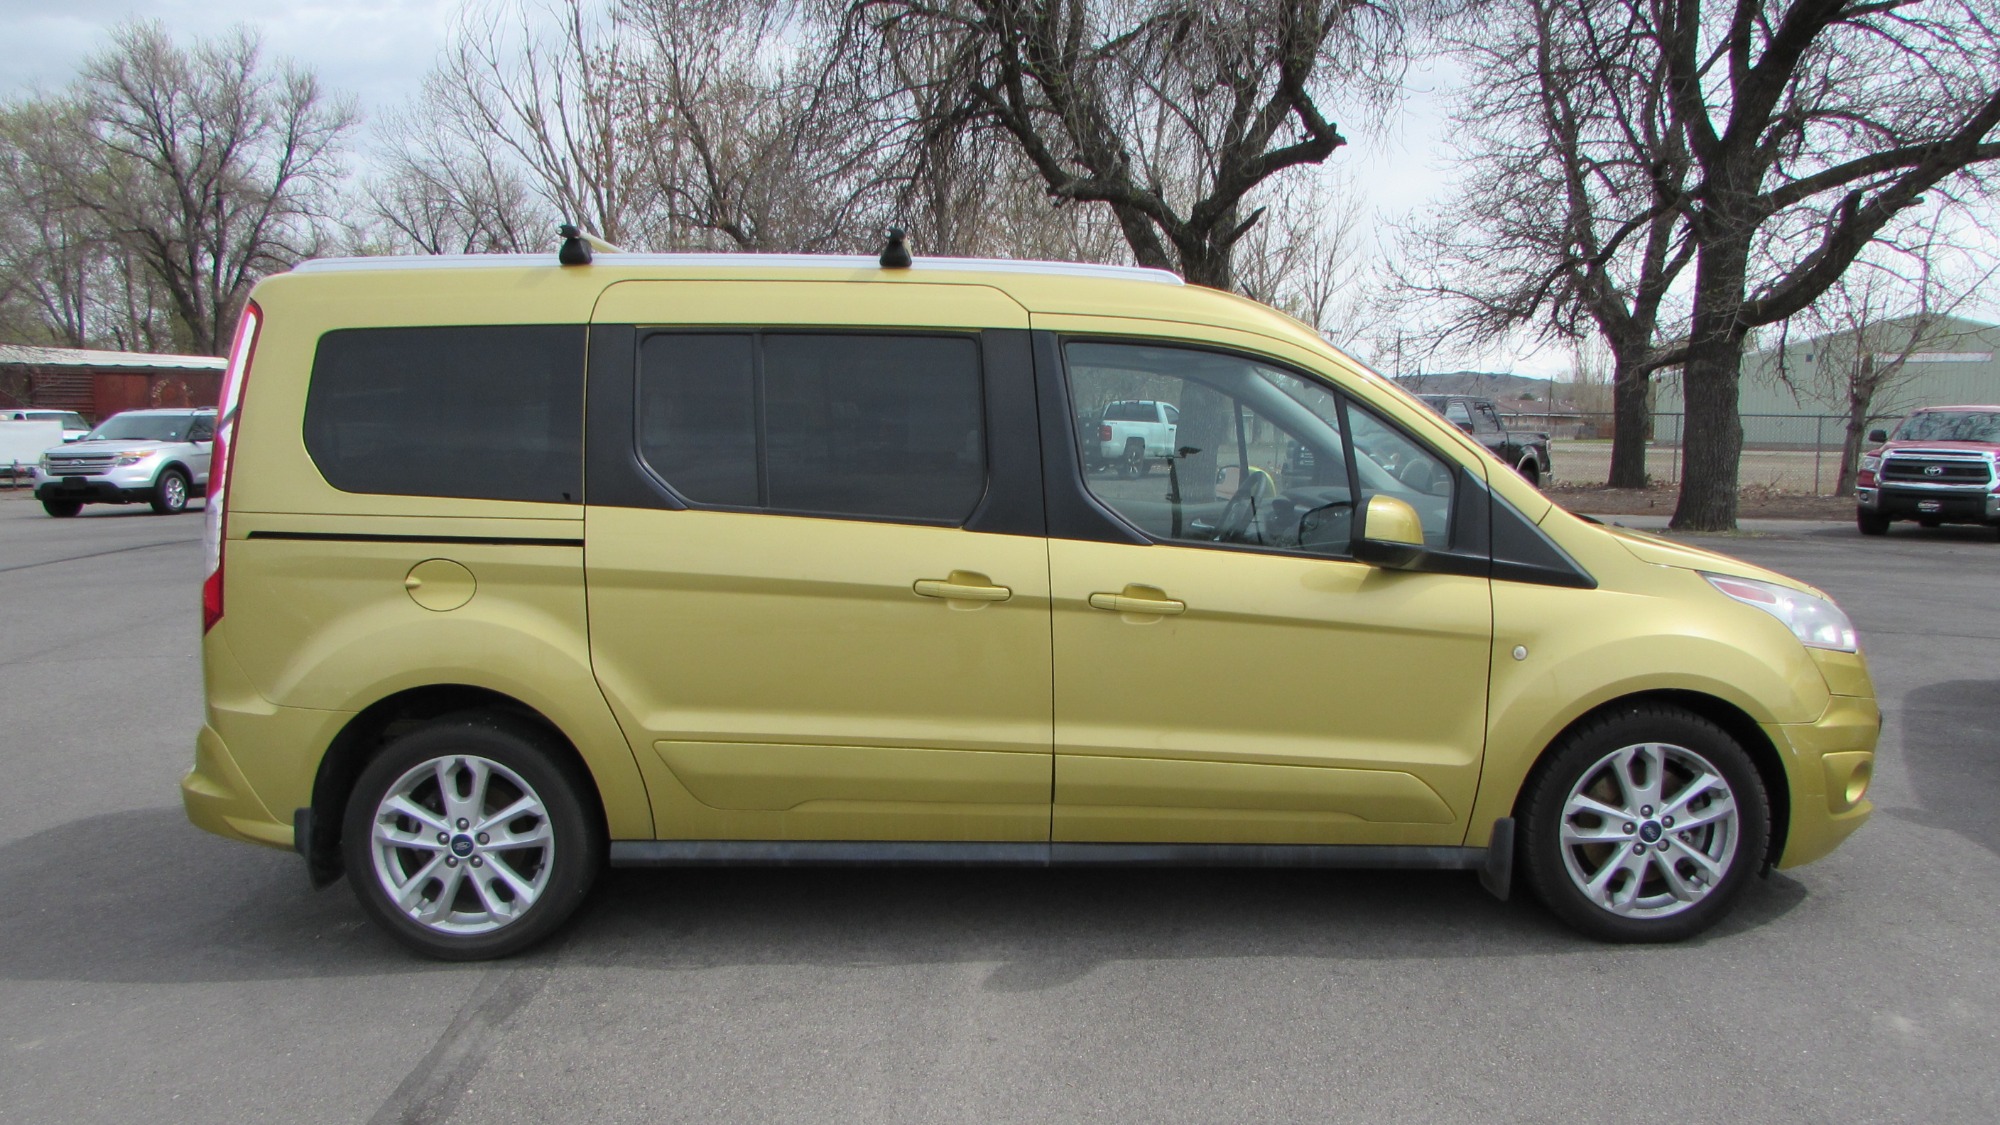 2014 Ford Transit Connect Wagon Titanium LWB FWD with Rear Liftgate